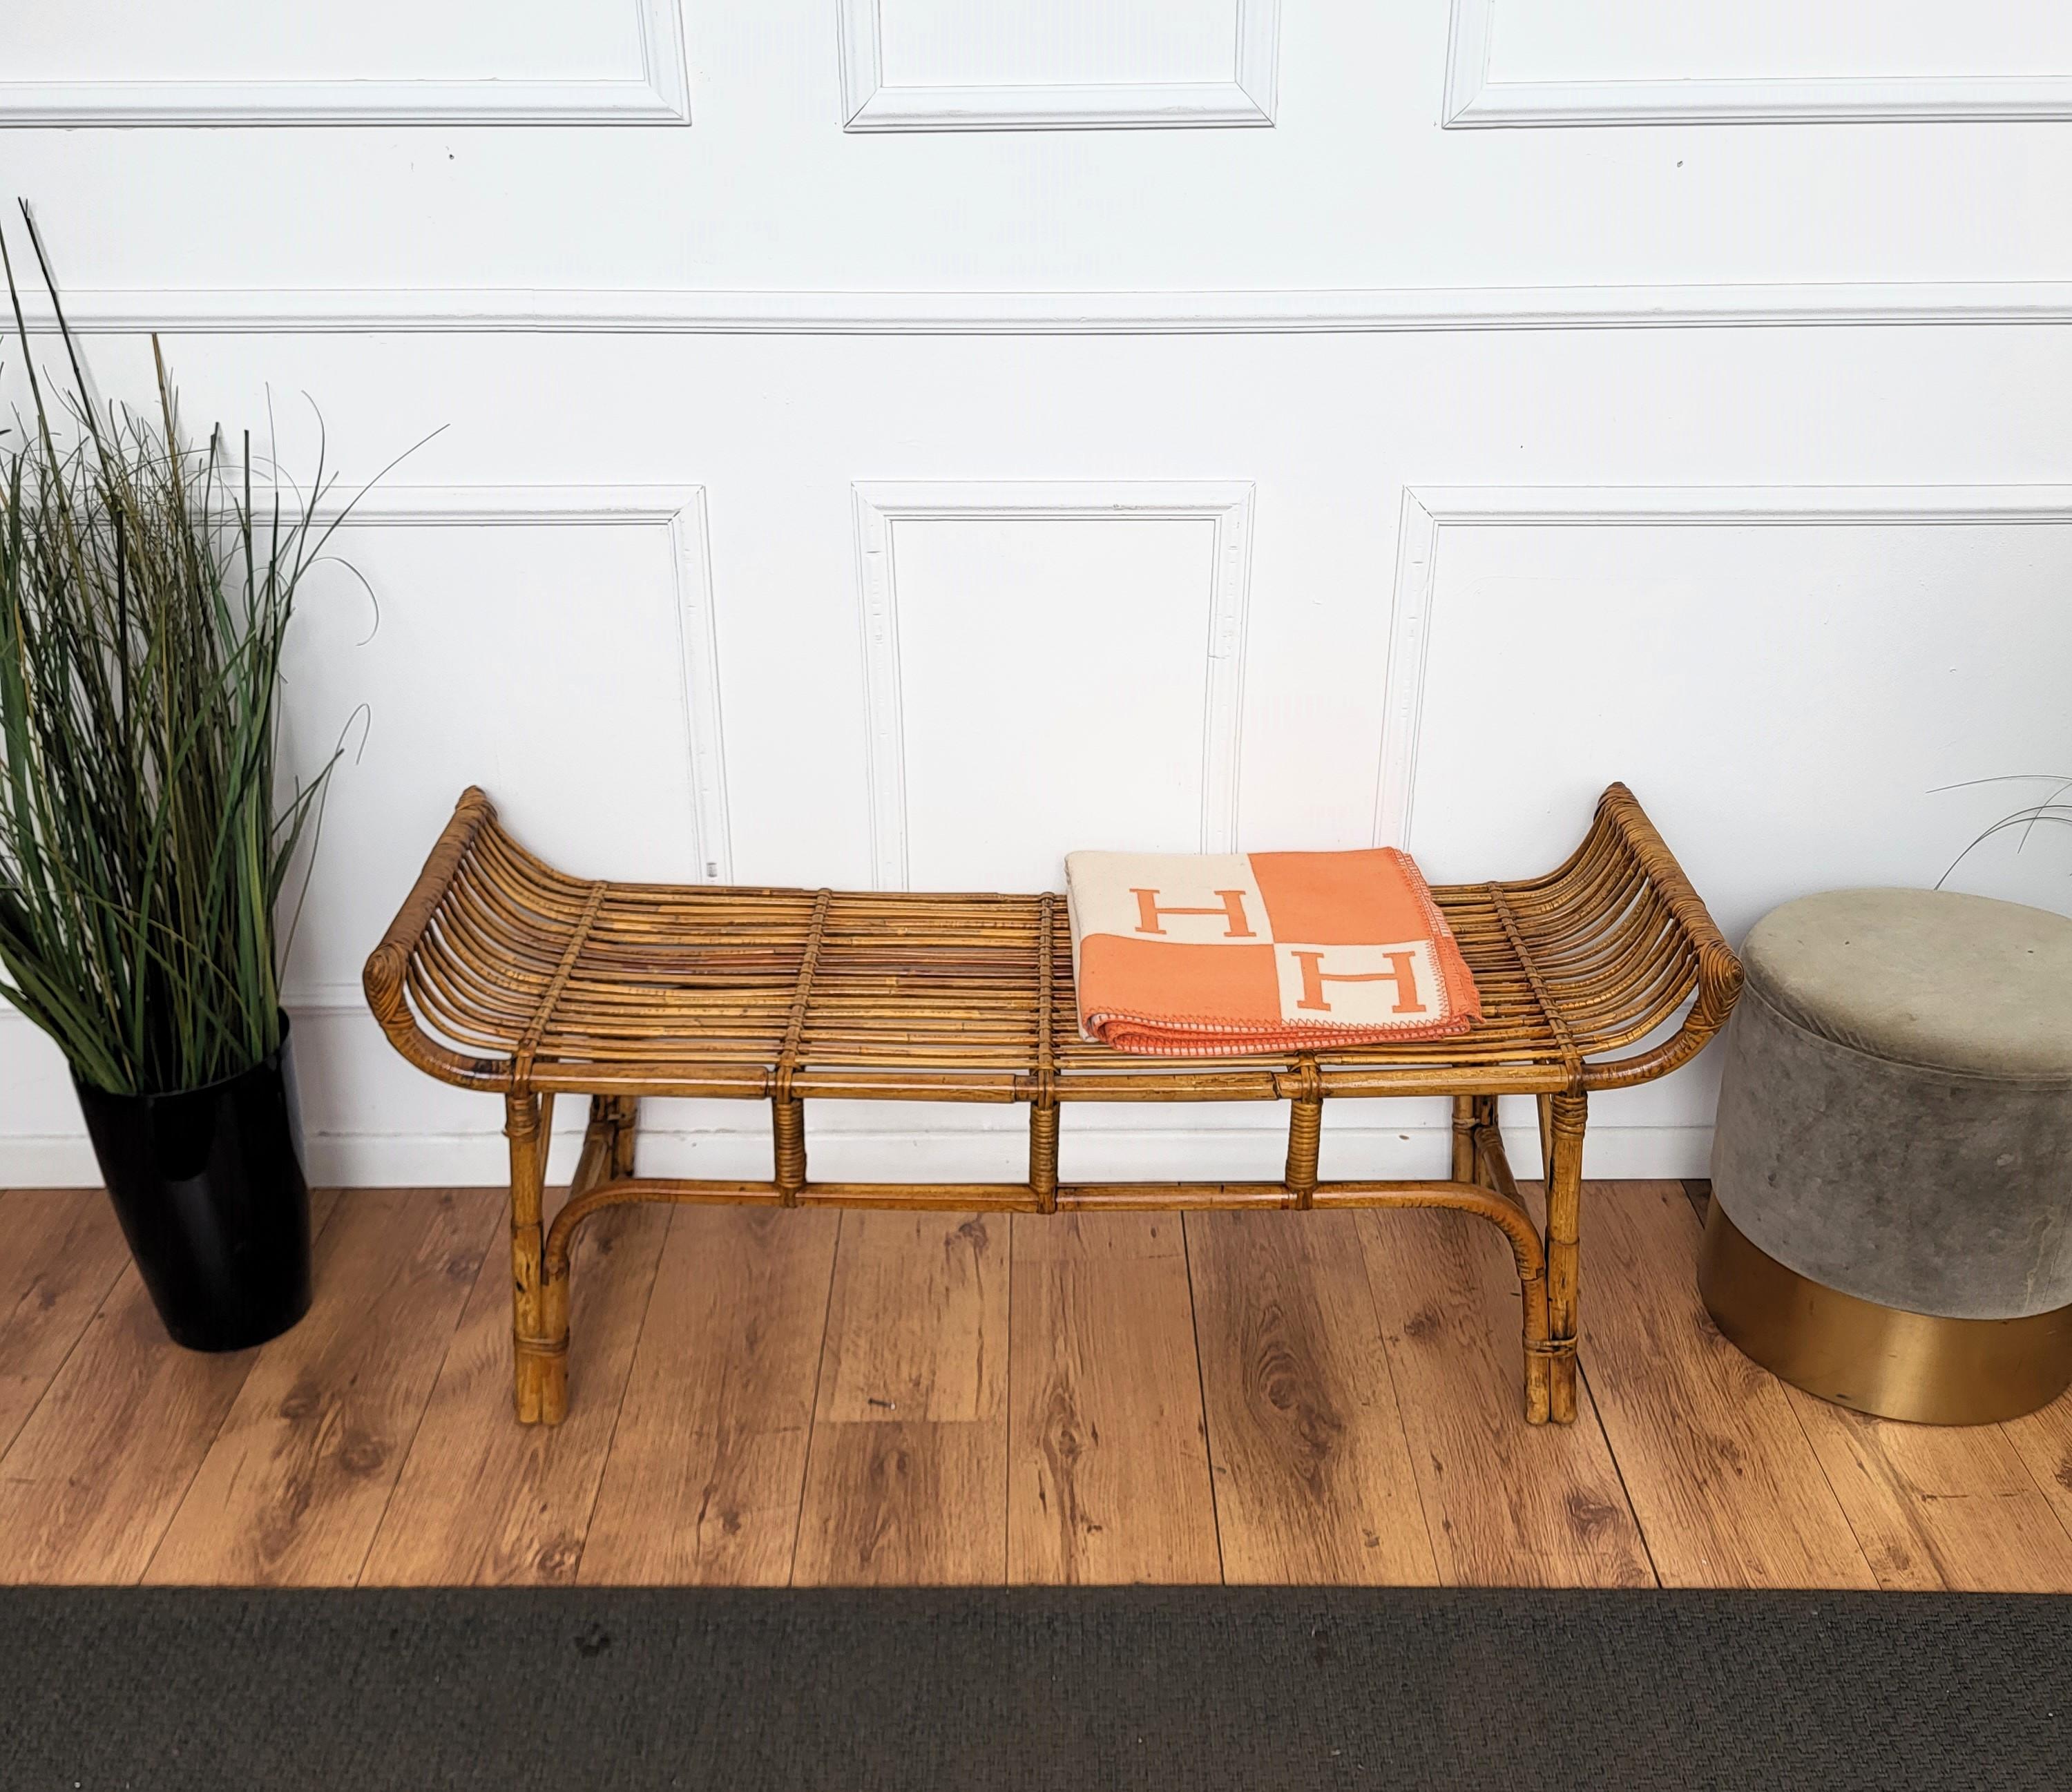 Beautiful 1960s Italian Mid-Century Modern bench that can be used as side accent or coffee table, perfect in any entry hallway as well as in front of a sofa or under an important painting. This charming piece is in the typical style of Audoux and